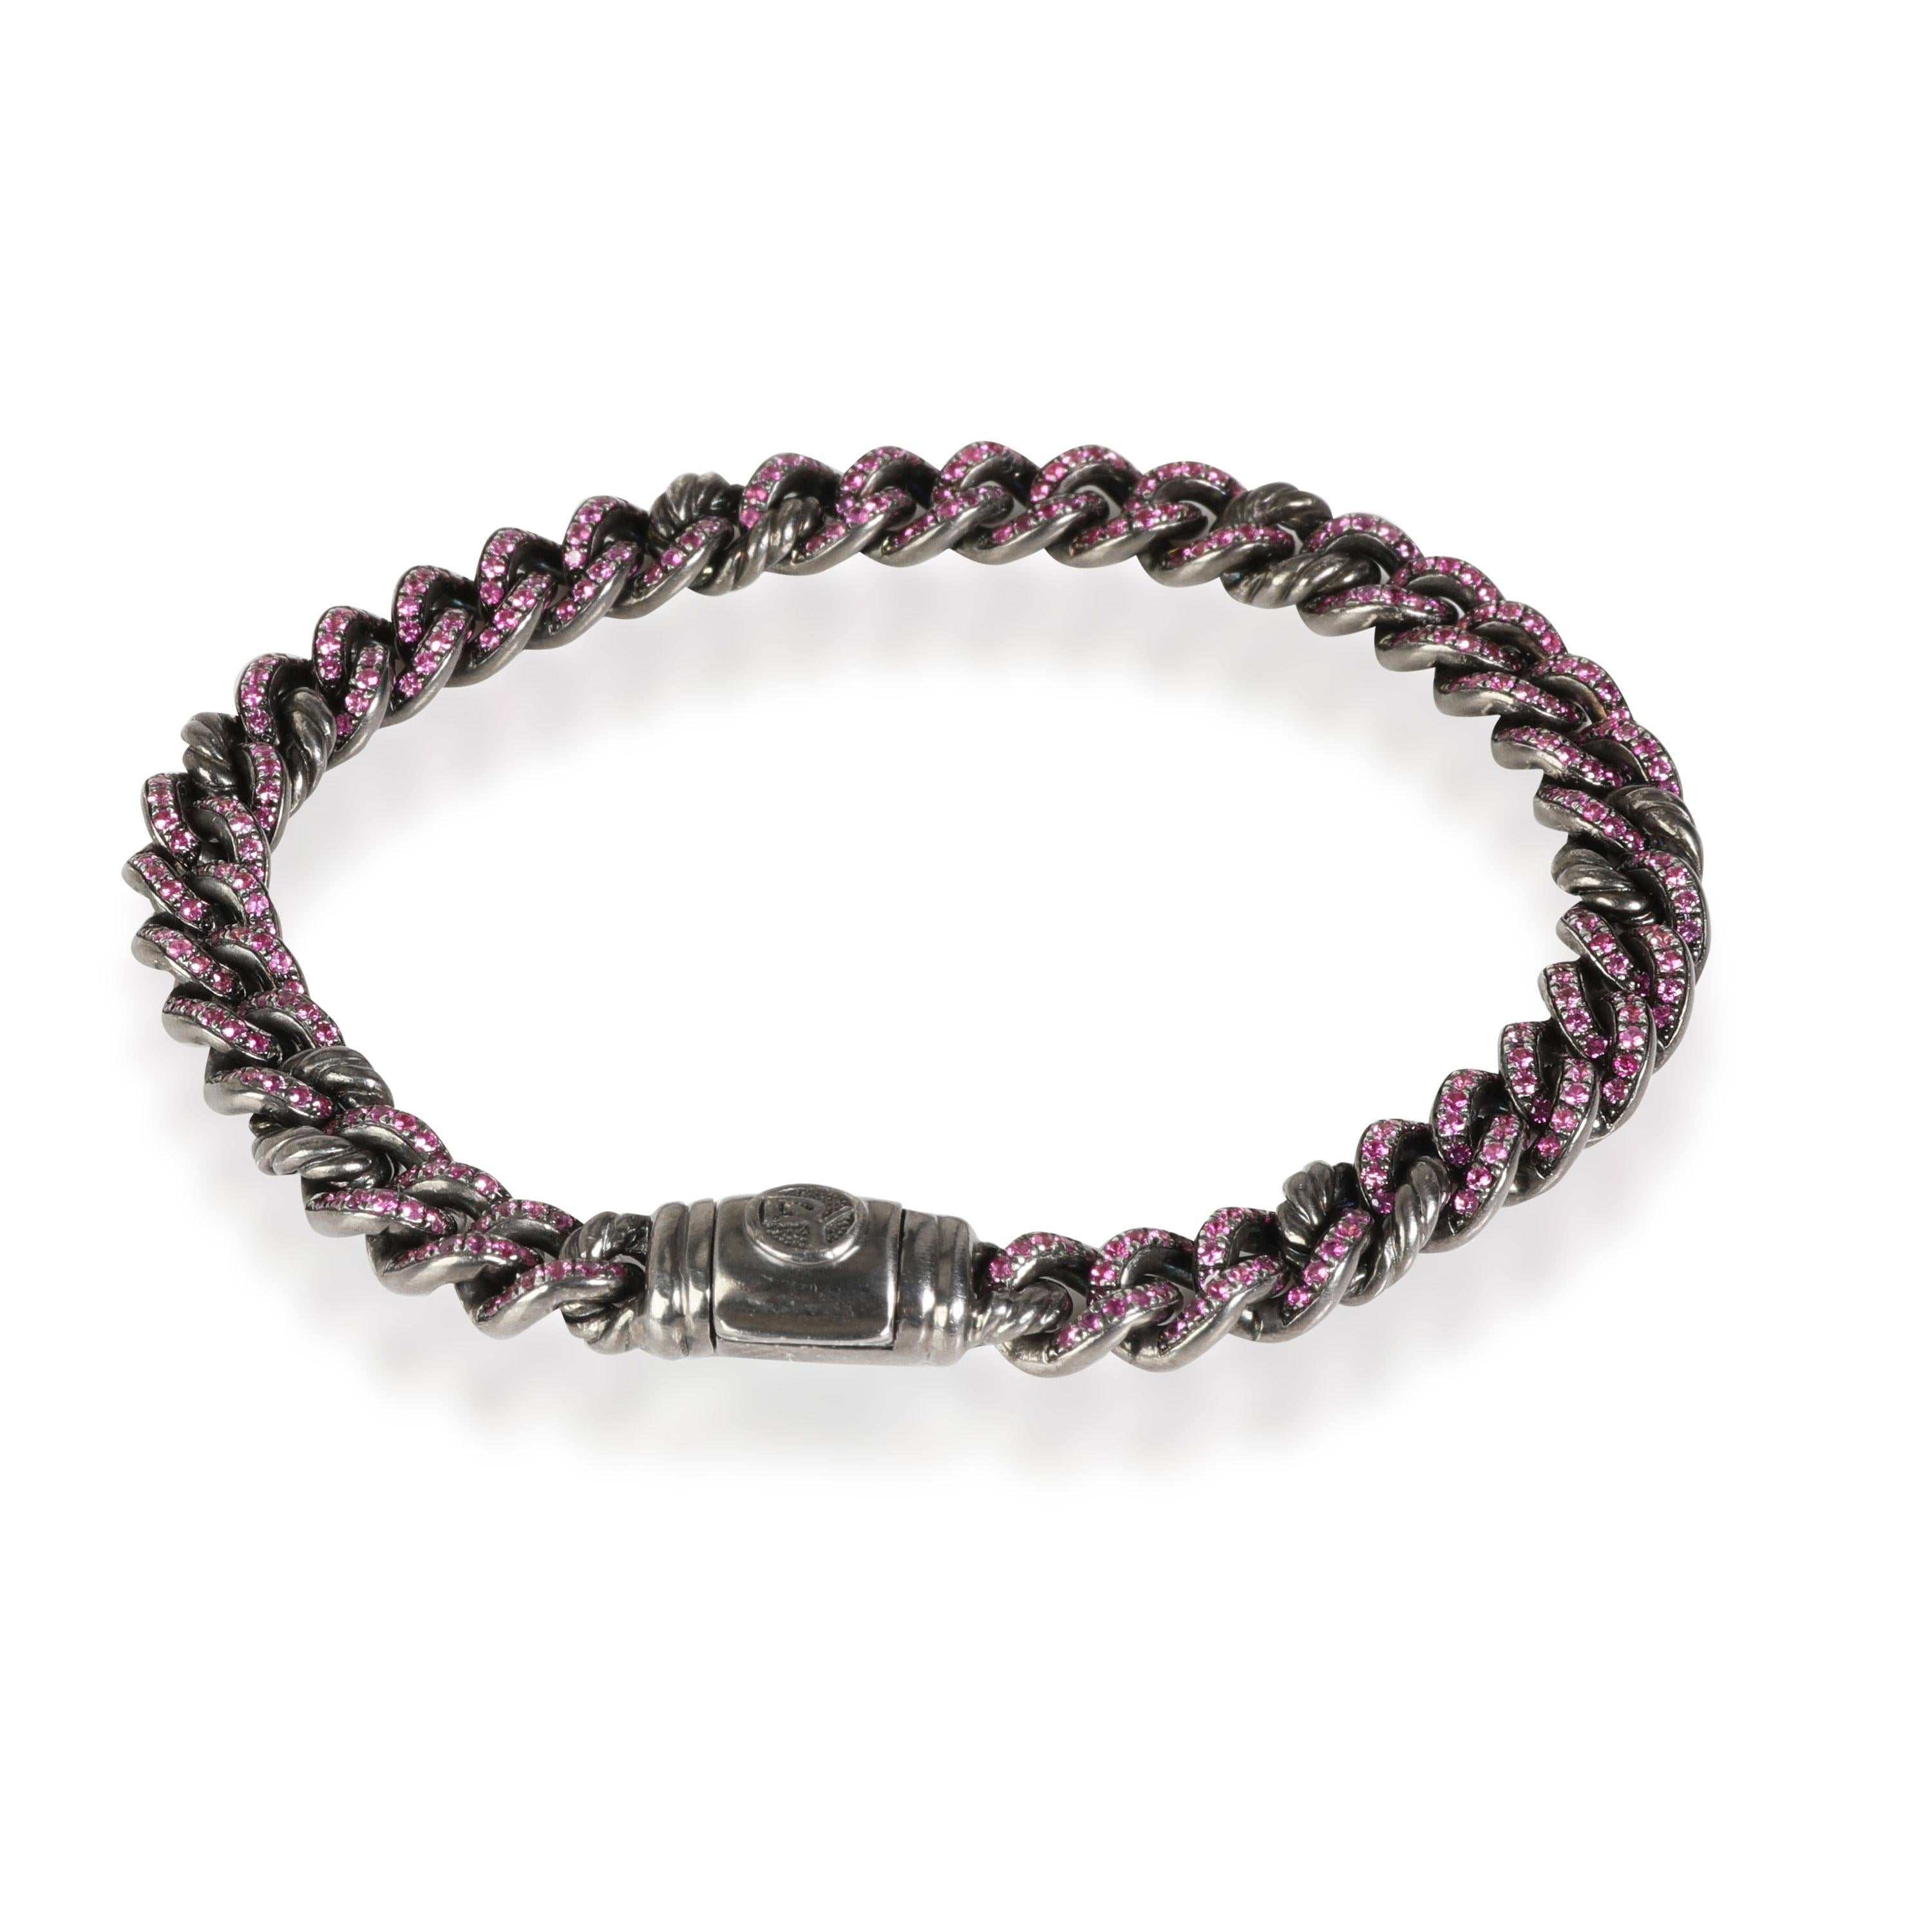 David Yurman Petite Pave Curb Link Pink Sapphire Bracelet in  Sterling Silver

PRIMARY DETAILS
SKU: 115902
Listing Title: David Yurman Petite Pave Curb Link Pink Sapphire Bracelet in  Sterling Silver
Condition Description: Retails for 4200 USD. In